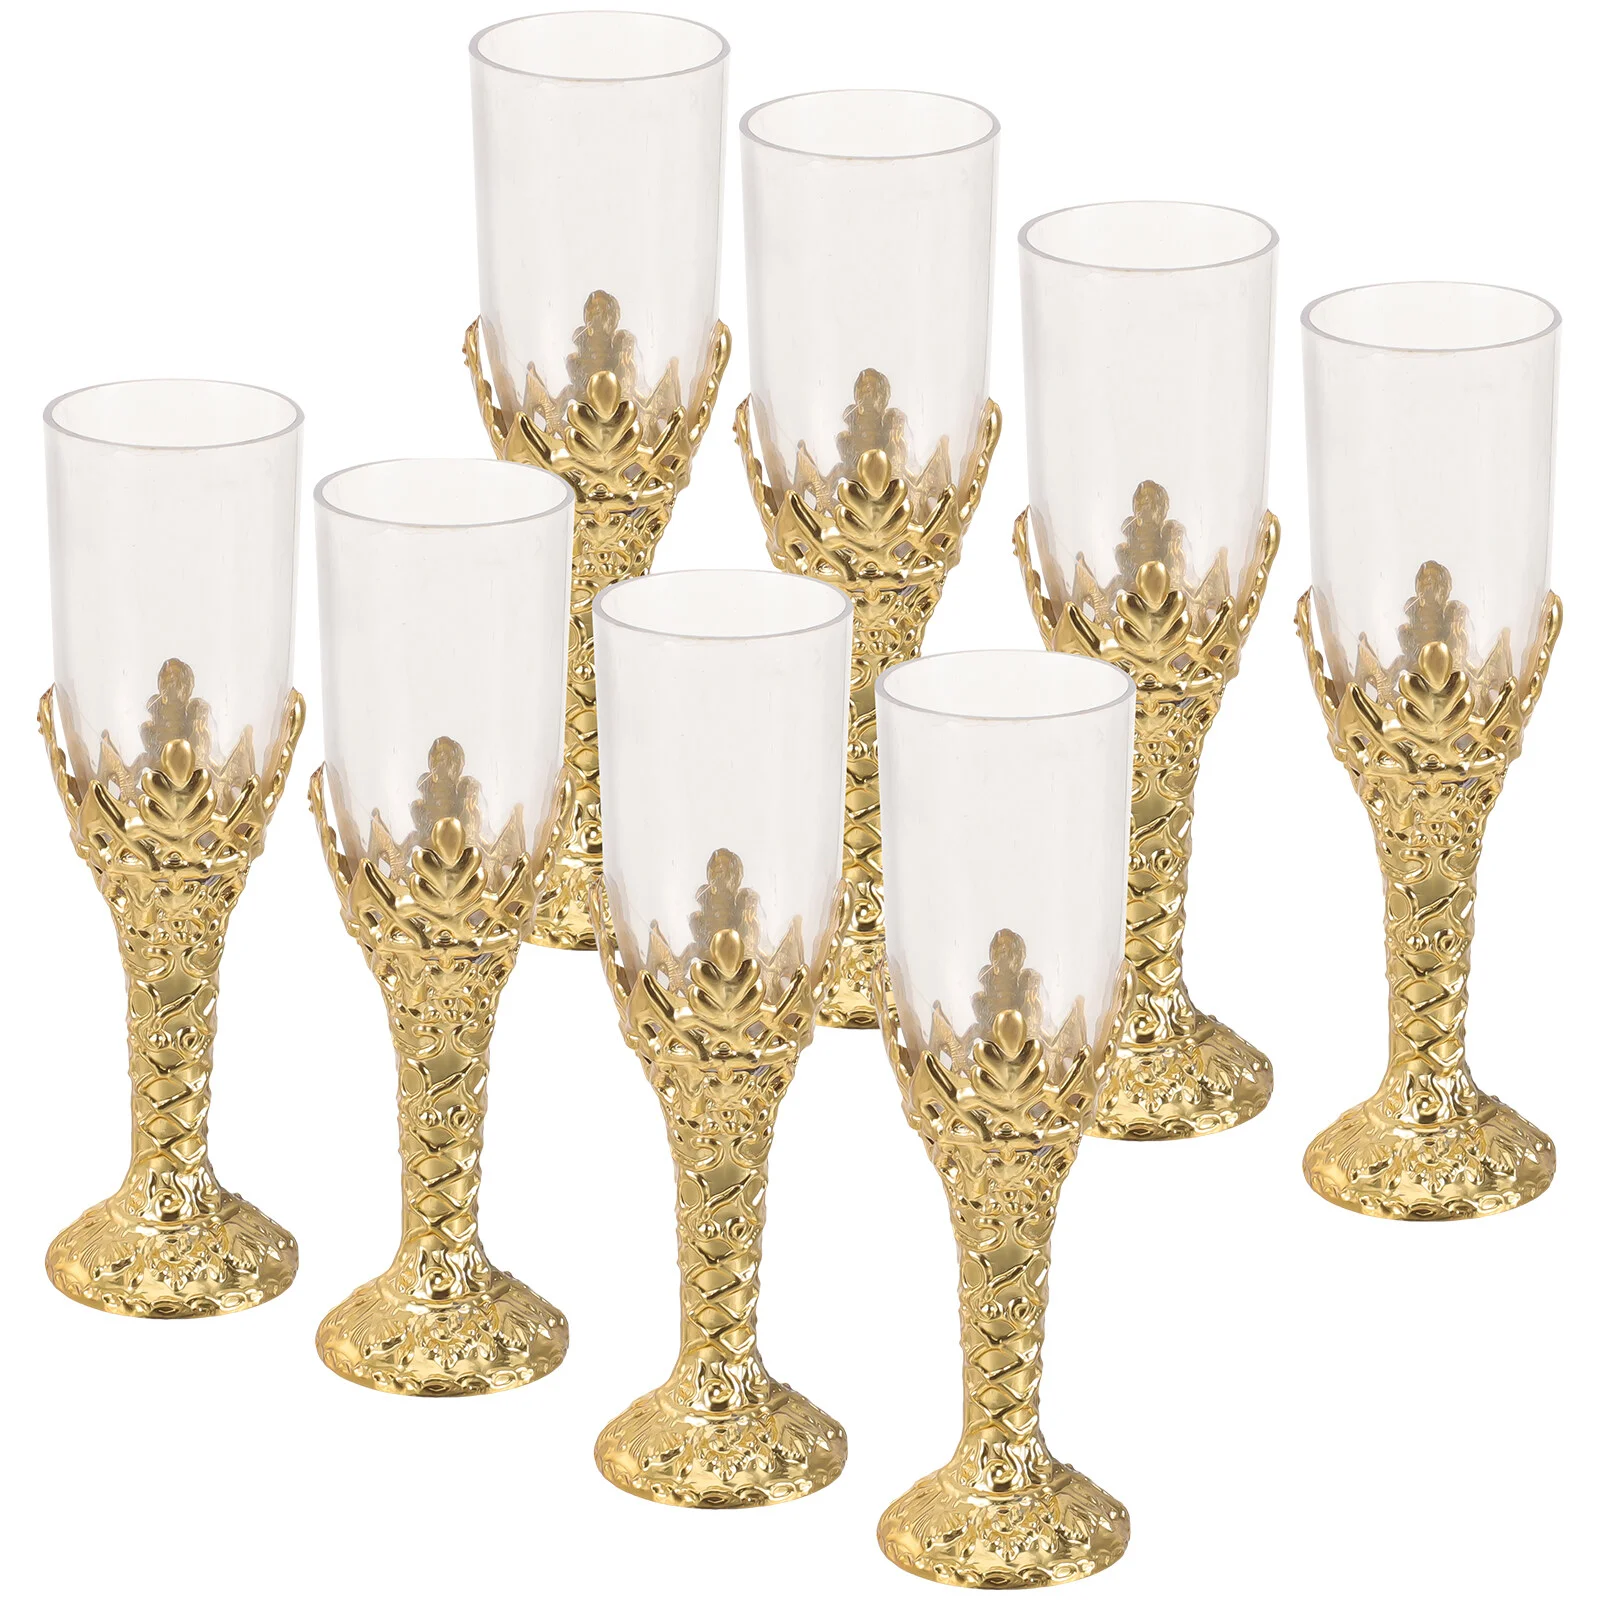 

12 Pcs Medieval Decorations Decorative Cups Multifunction Delicate Goblet Plastic Party Dinner Church Accessory